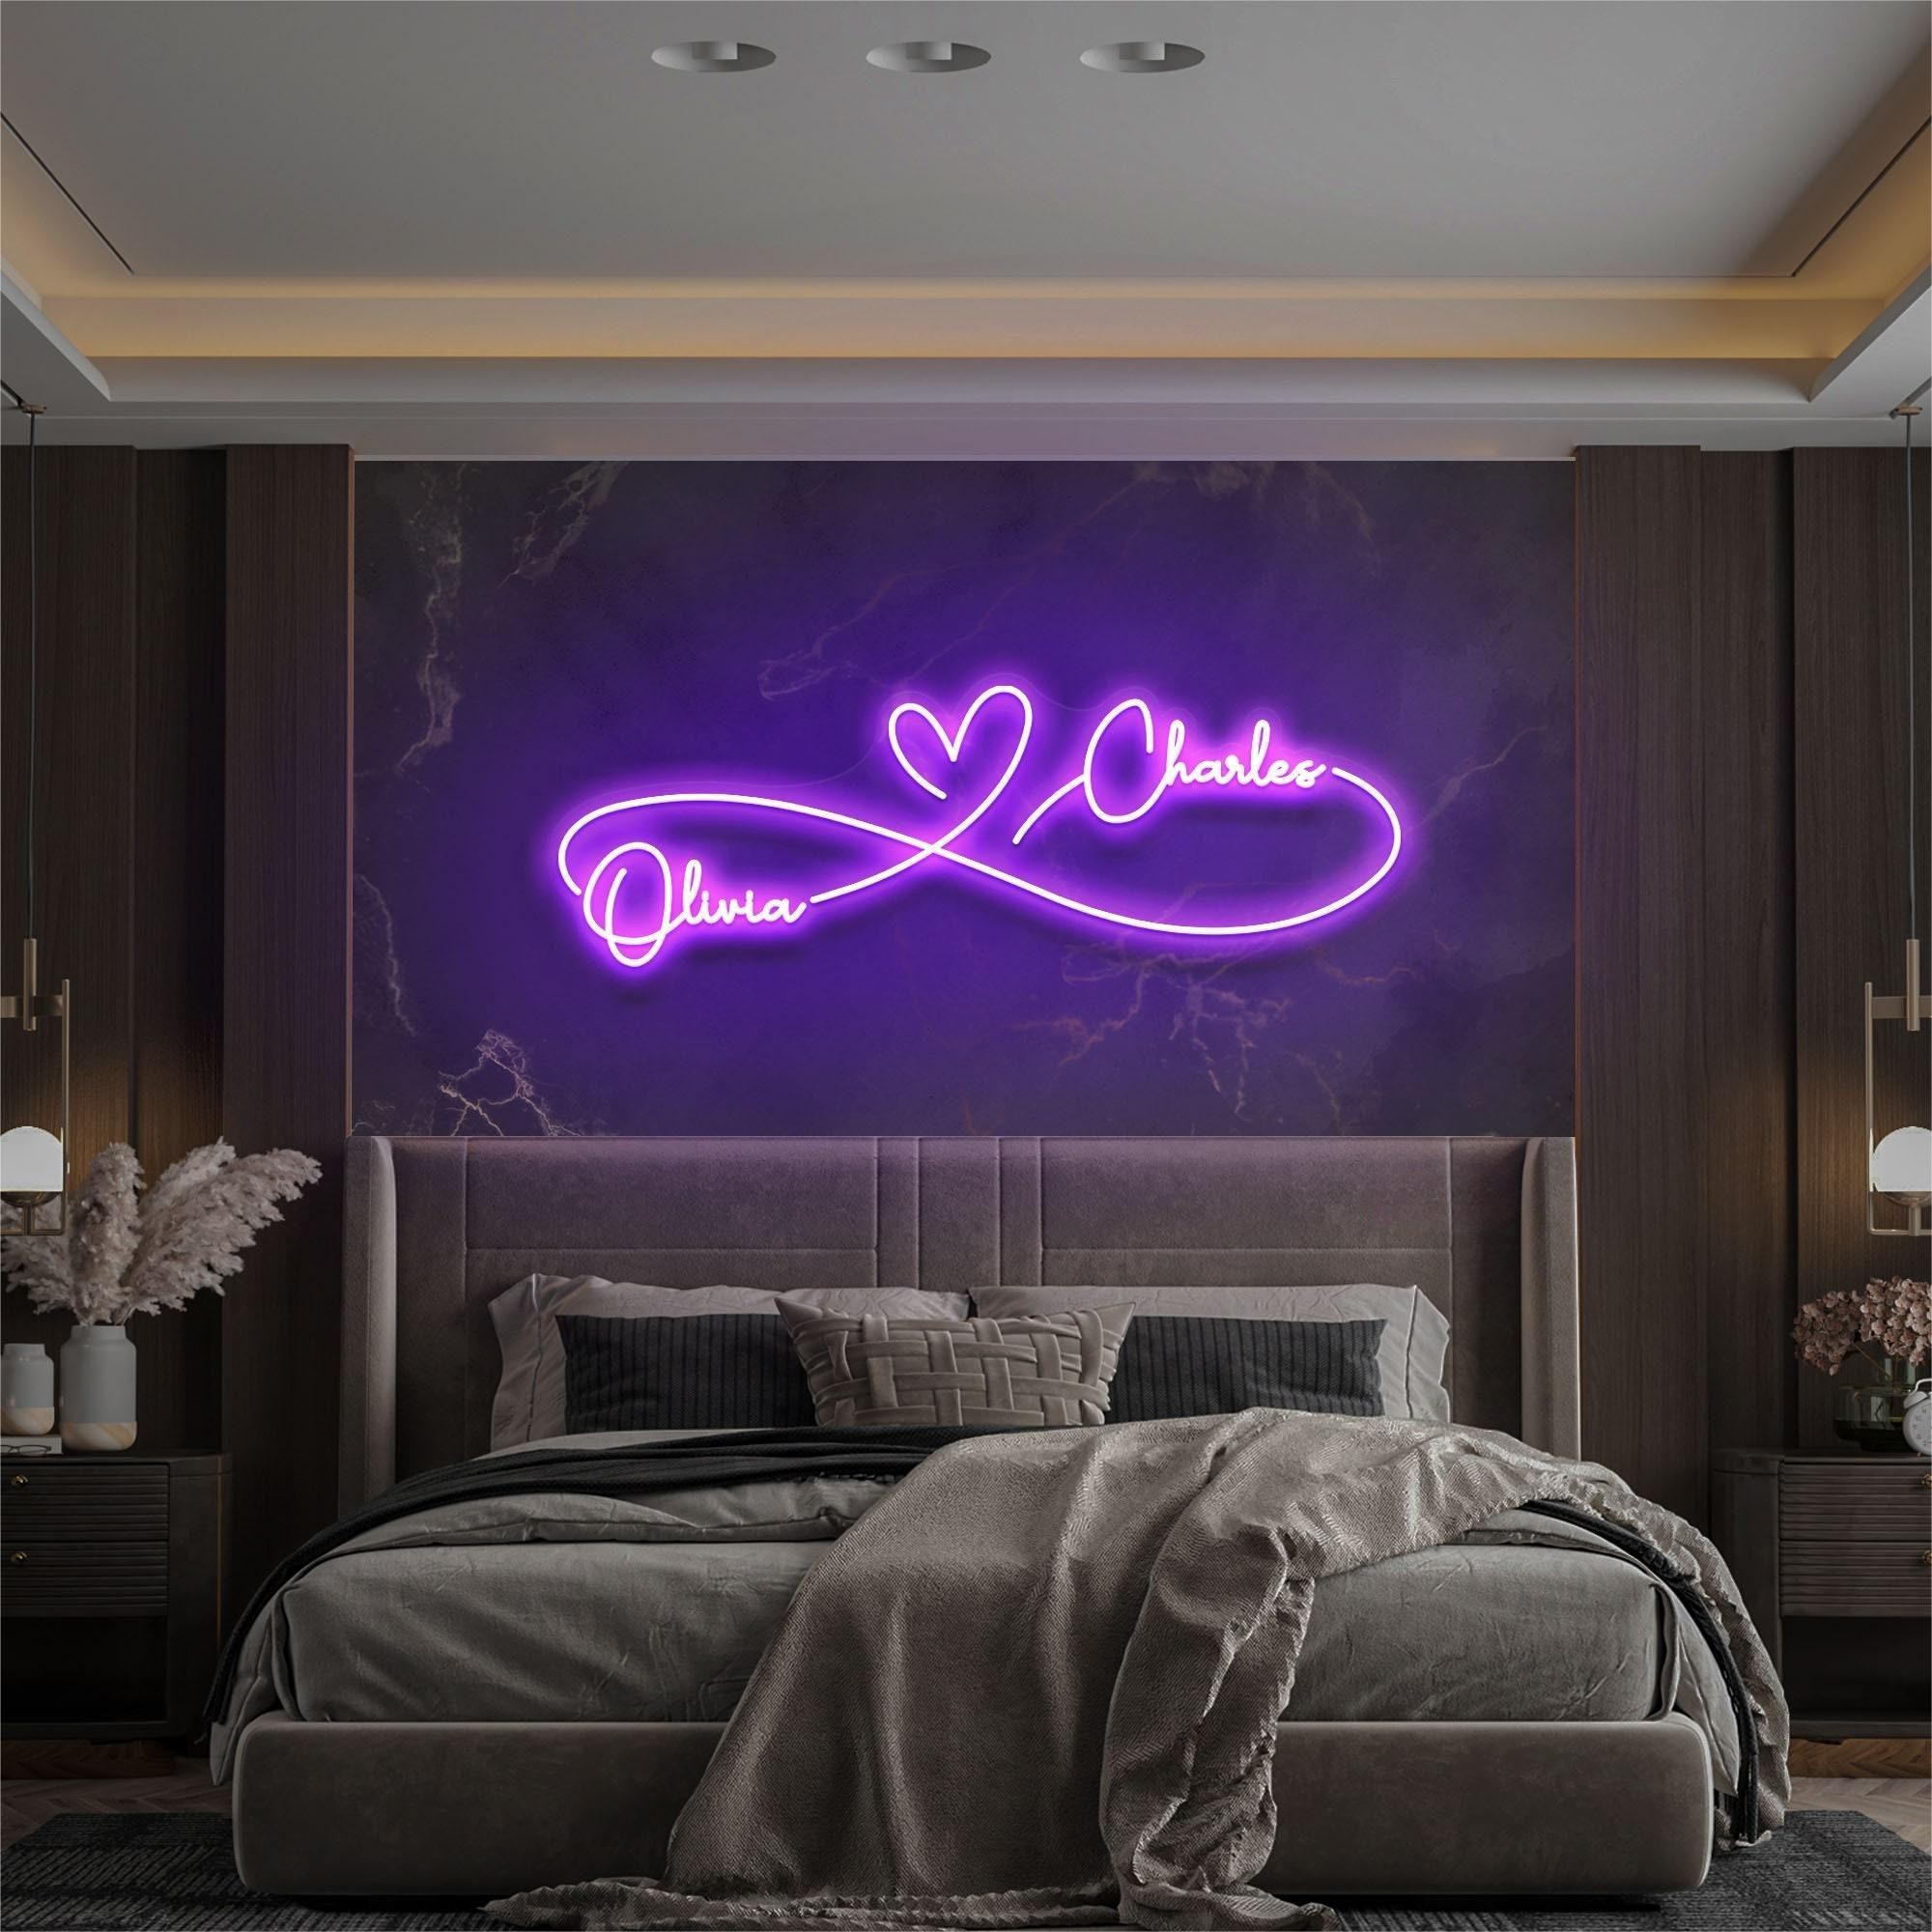 NEONIP-Personalized 100% Handmade Wedding LED Neon Sign with Your Names